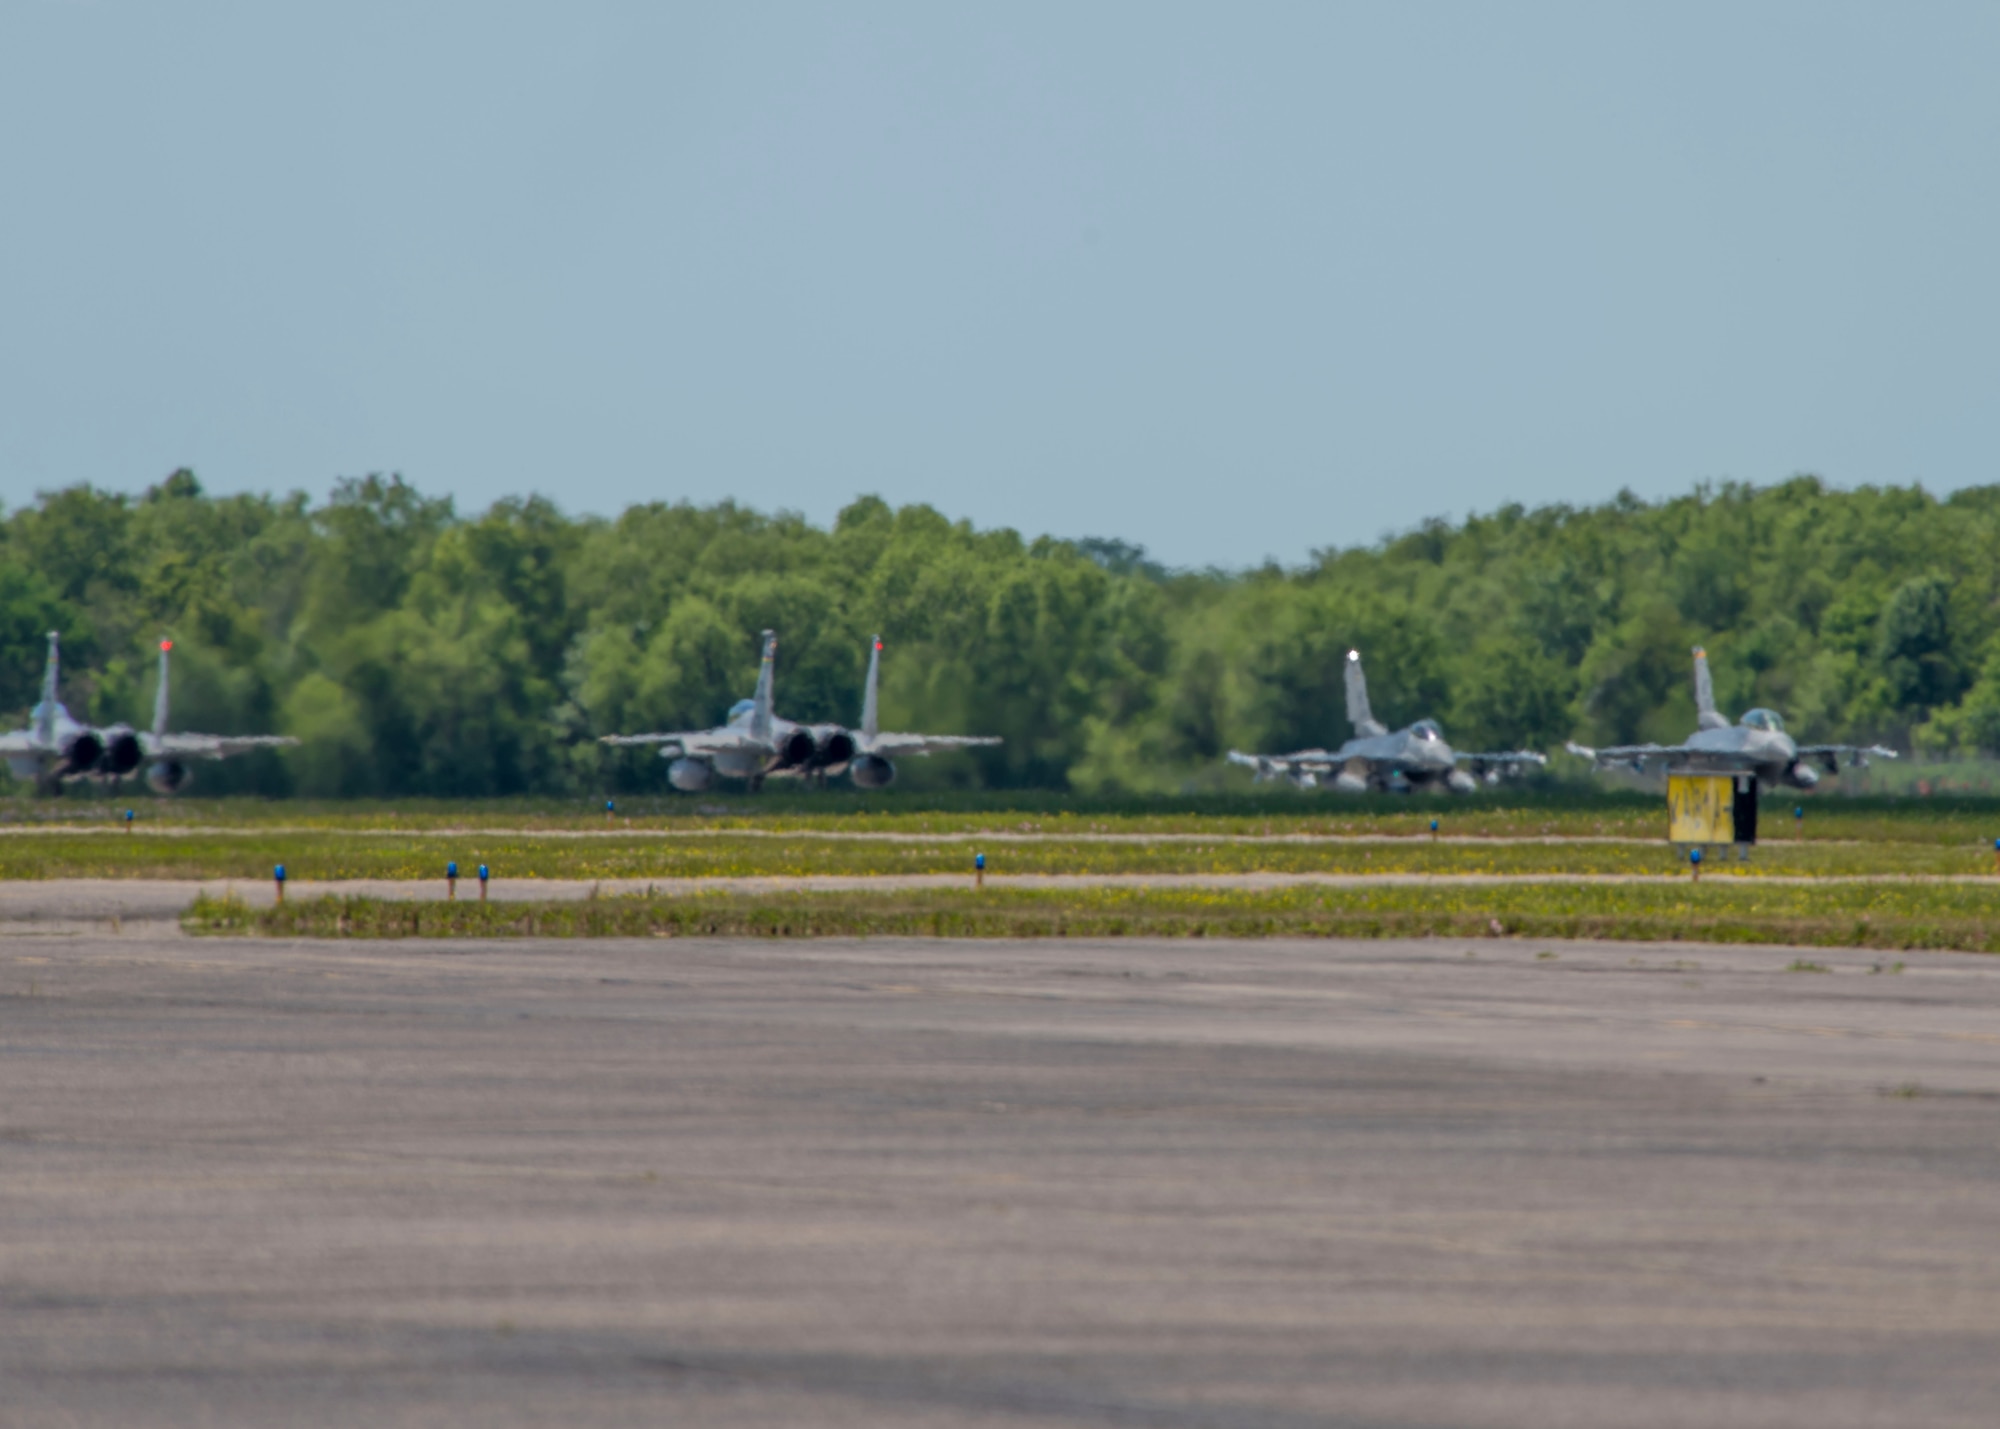 U.S. Air Force F-16 Fighting Falcons from Holloman's 8th Fighter Squadron, and F-15 Eagles from the Louisiana Guard National Guard's 159th Fighter Wing, taxi down the runway, April 10, 2019, on Naval Air Station Joint Reserve Base New Orleans, La. Pilots from the 8th FS participated in dissimilar aircraft training and close air support exercises with the Eagles from the 159th FW and joint terminal air controllers from the U.S. Army's 7th Special Forces Group. (U.S. Air Force photo by Airman 1st Class Kindra Stewart)